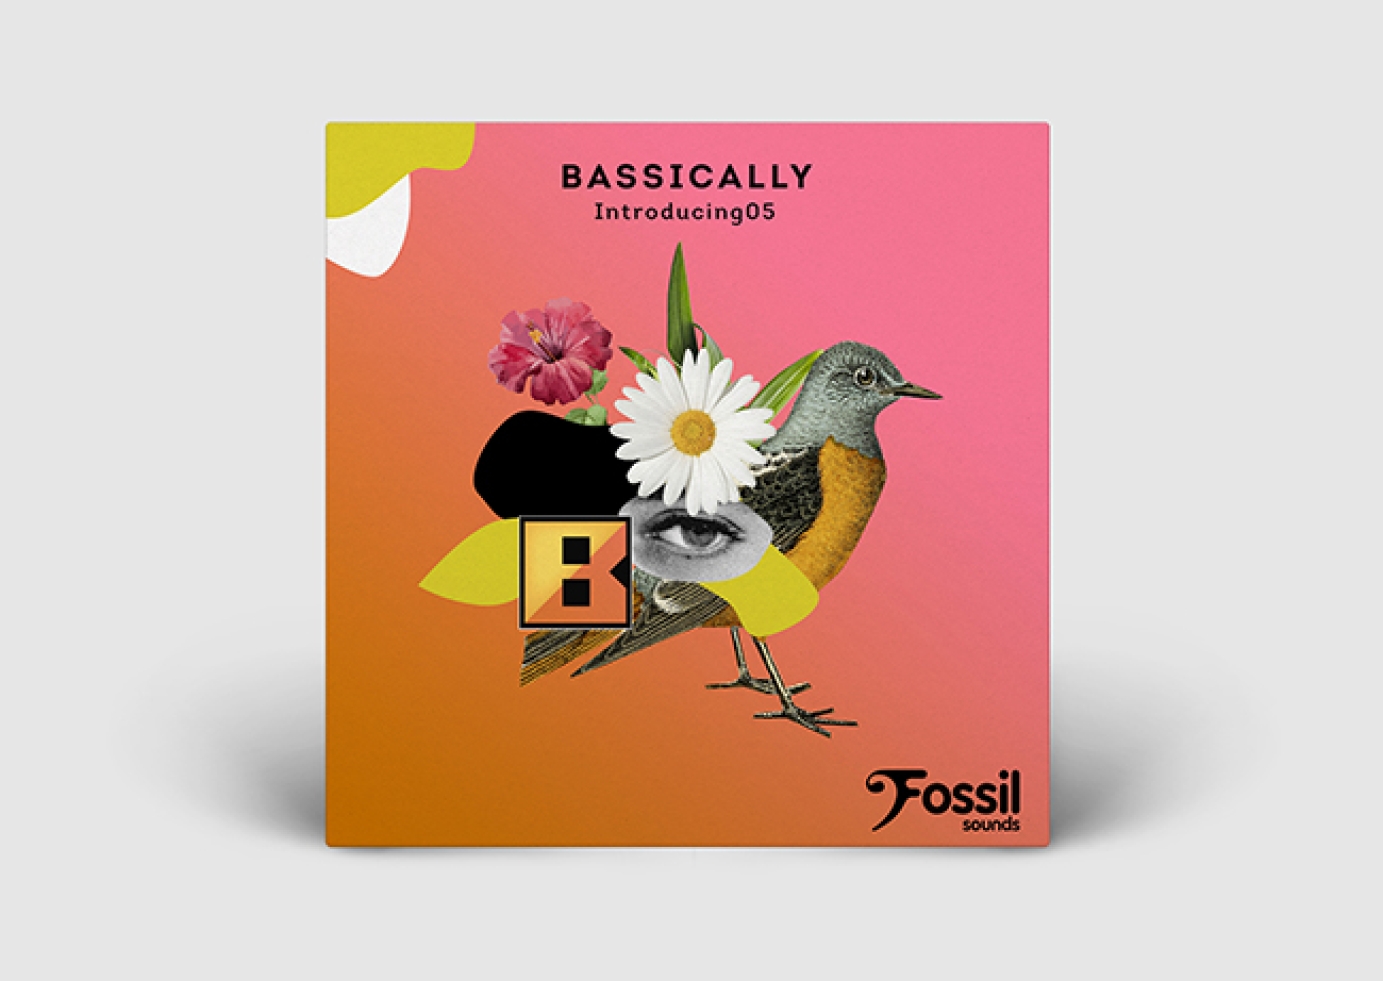 Artwork for Fossil Sounds by florgutman